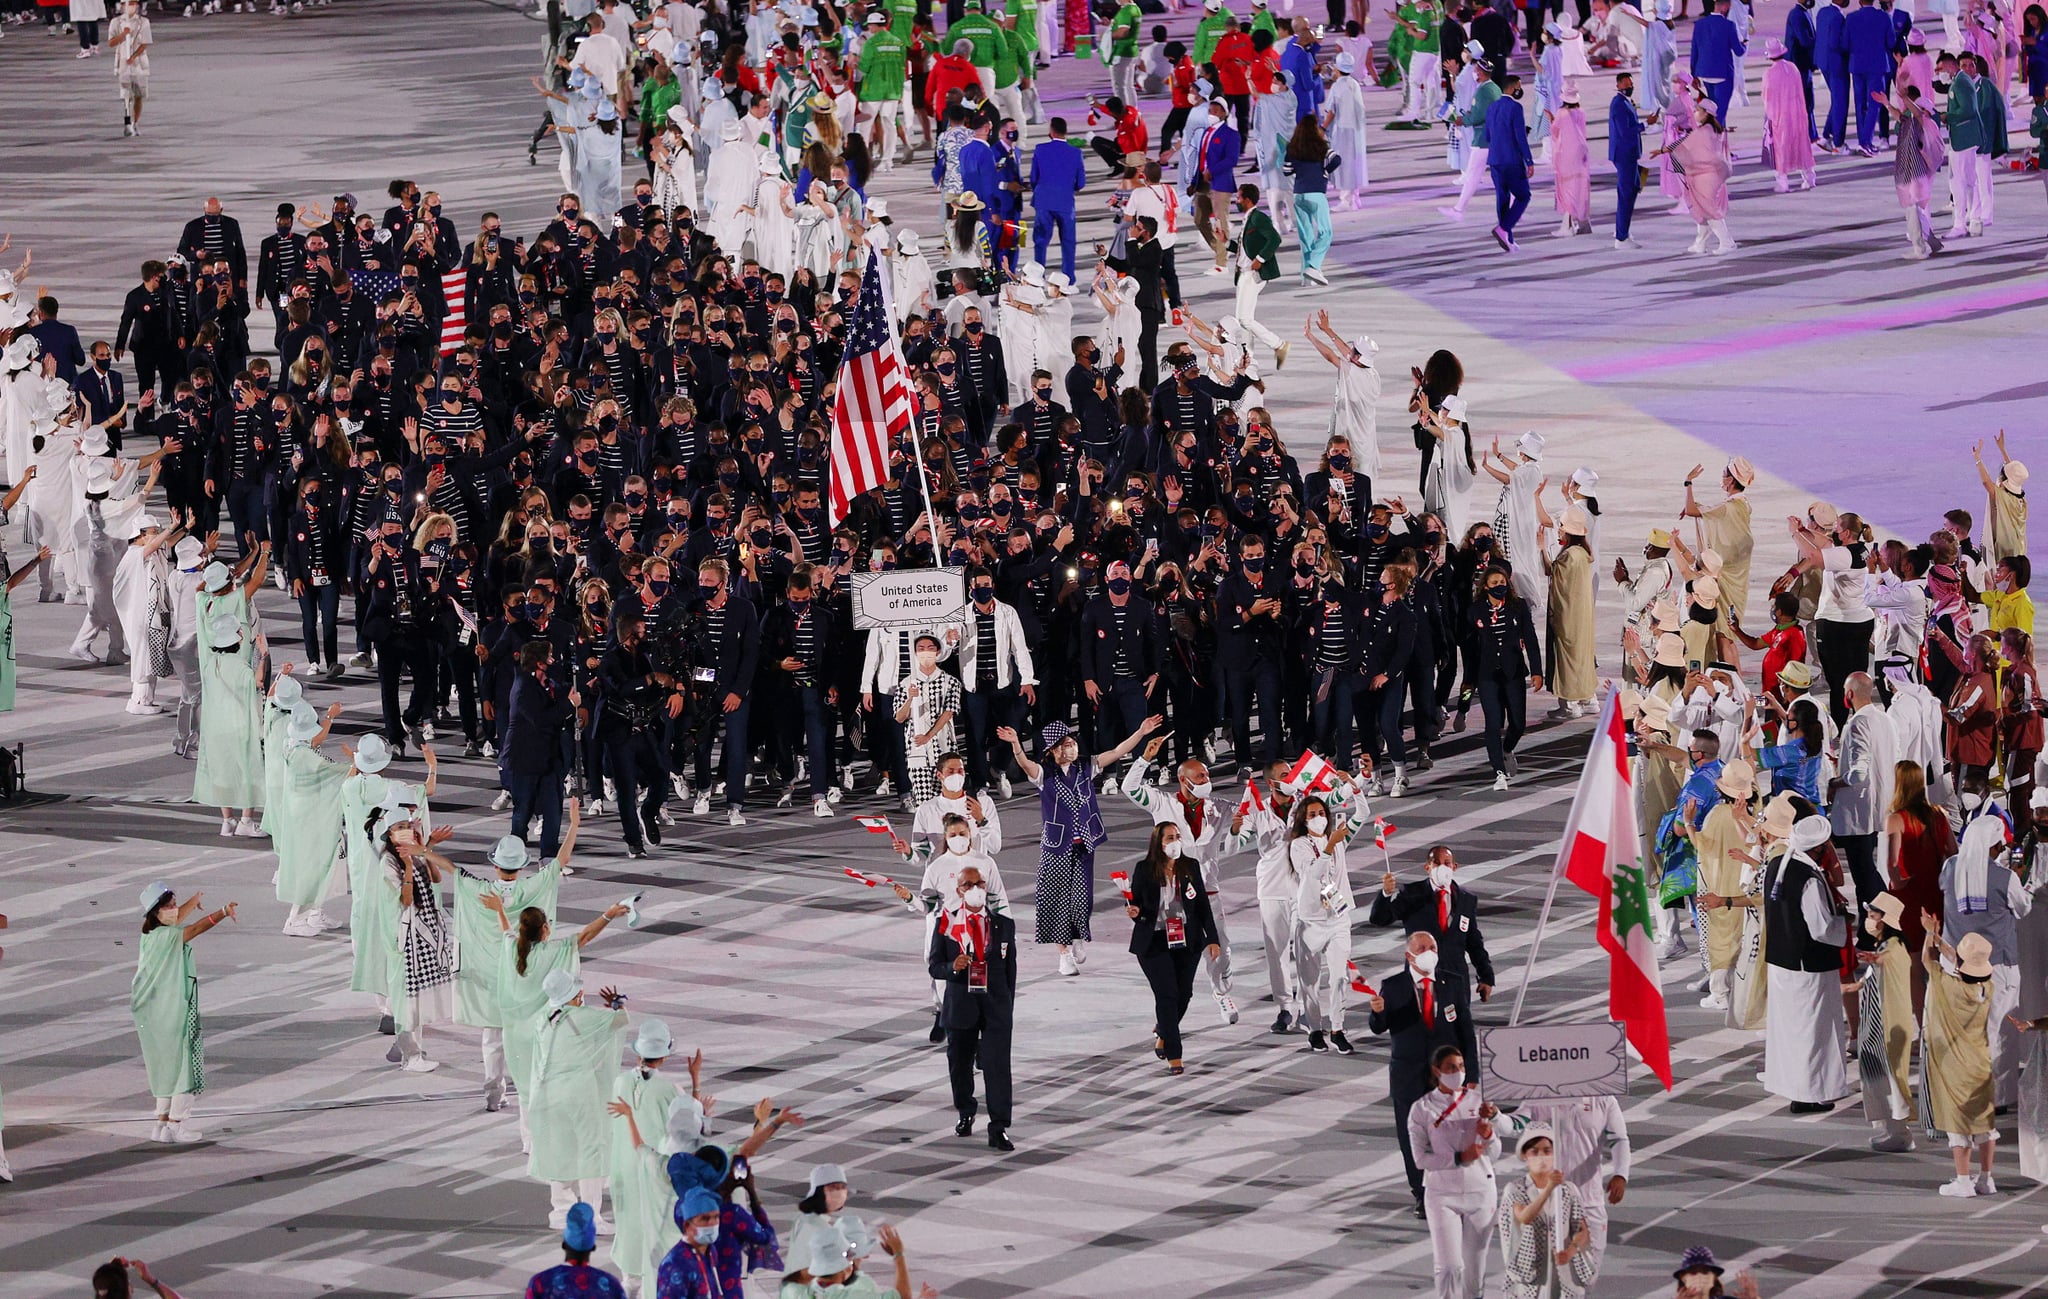 TOKYO, JAPAN - JULY 23: Flag bearers Sue Bird and Eddy Alvarez of Team United States lead their team in during the Opening Ceremony of the Tokyo 2020 Olympic Games at Olympic Stadium on July 23, 2021 in Tokyo, Japan. (Photo by Patrick Smith/Getty Images)